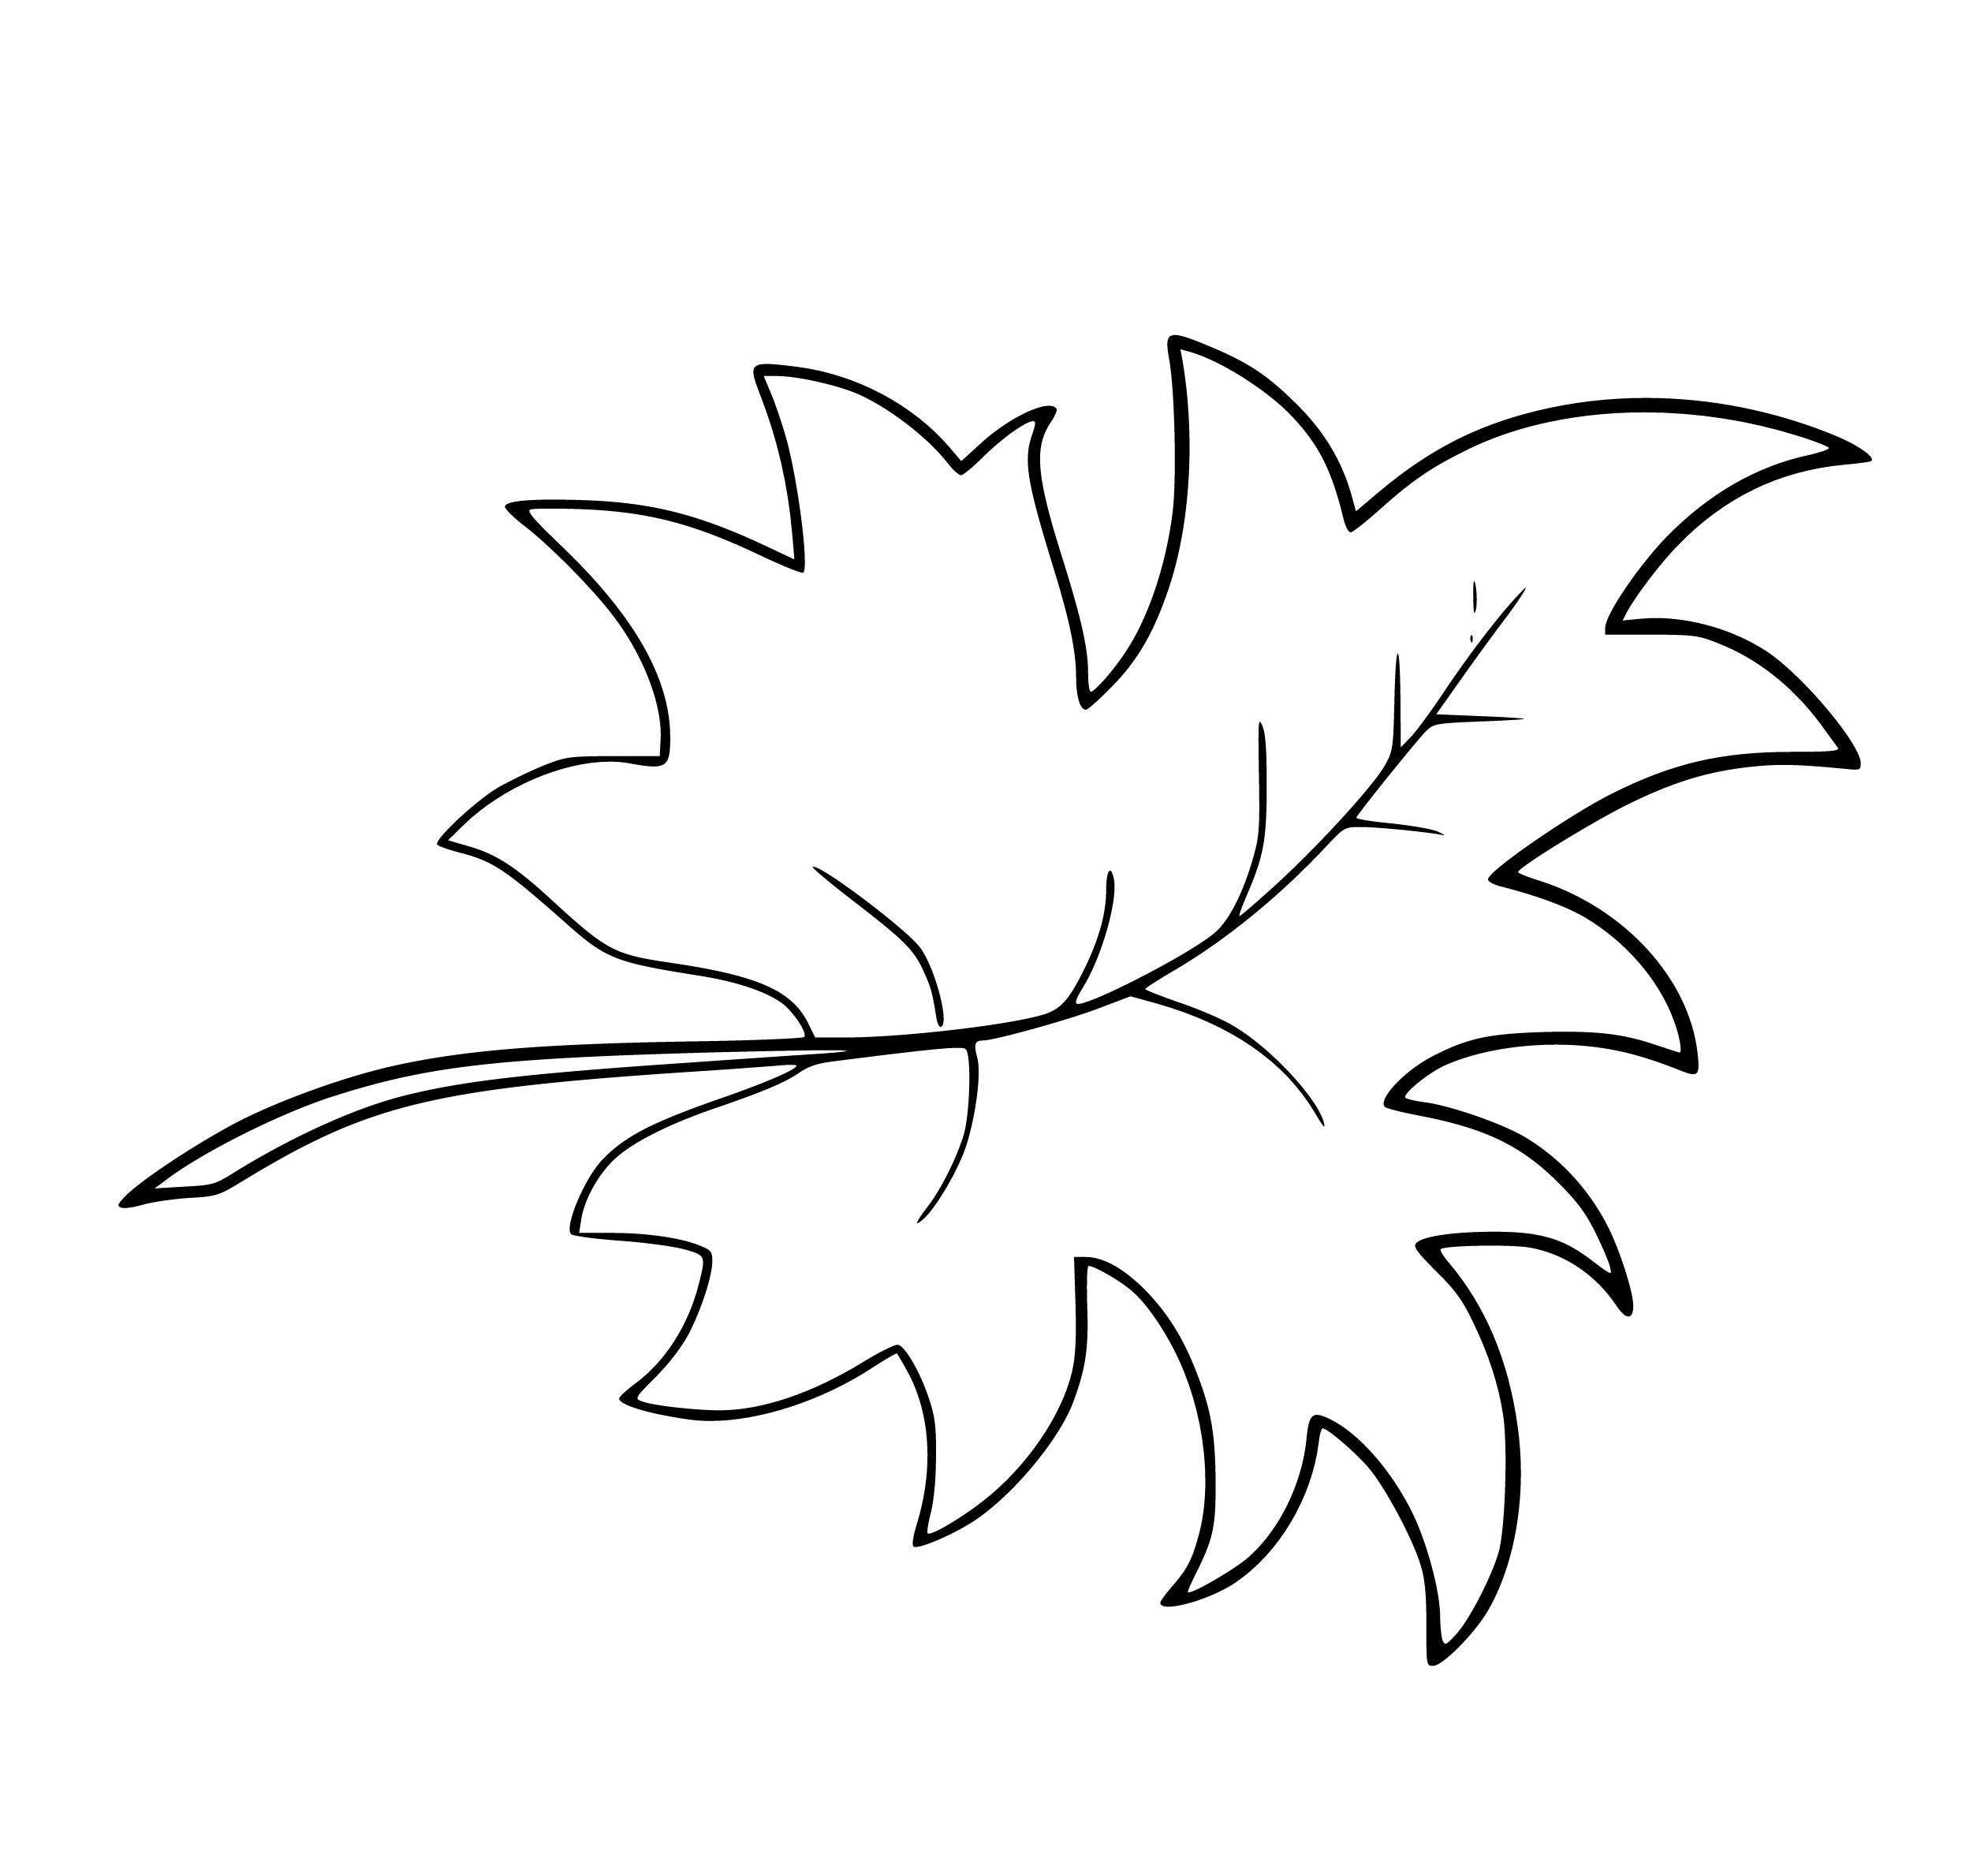 Maple Leaf Coloring Page Printable for Kids, Free, Simple and Easy, as PDF